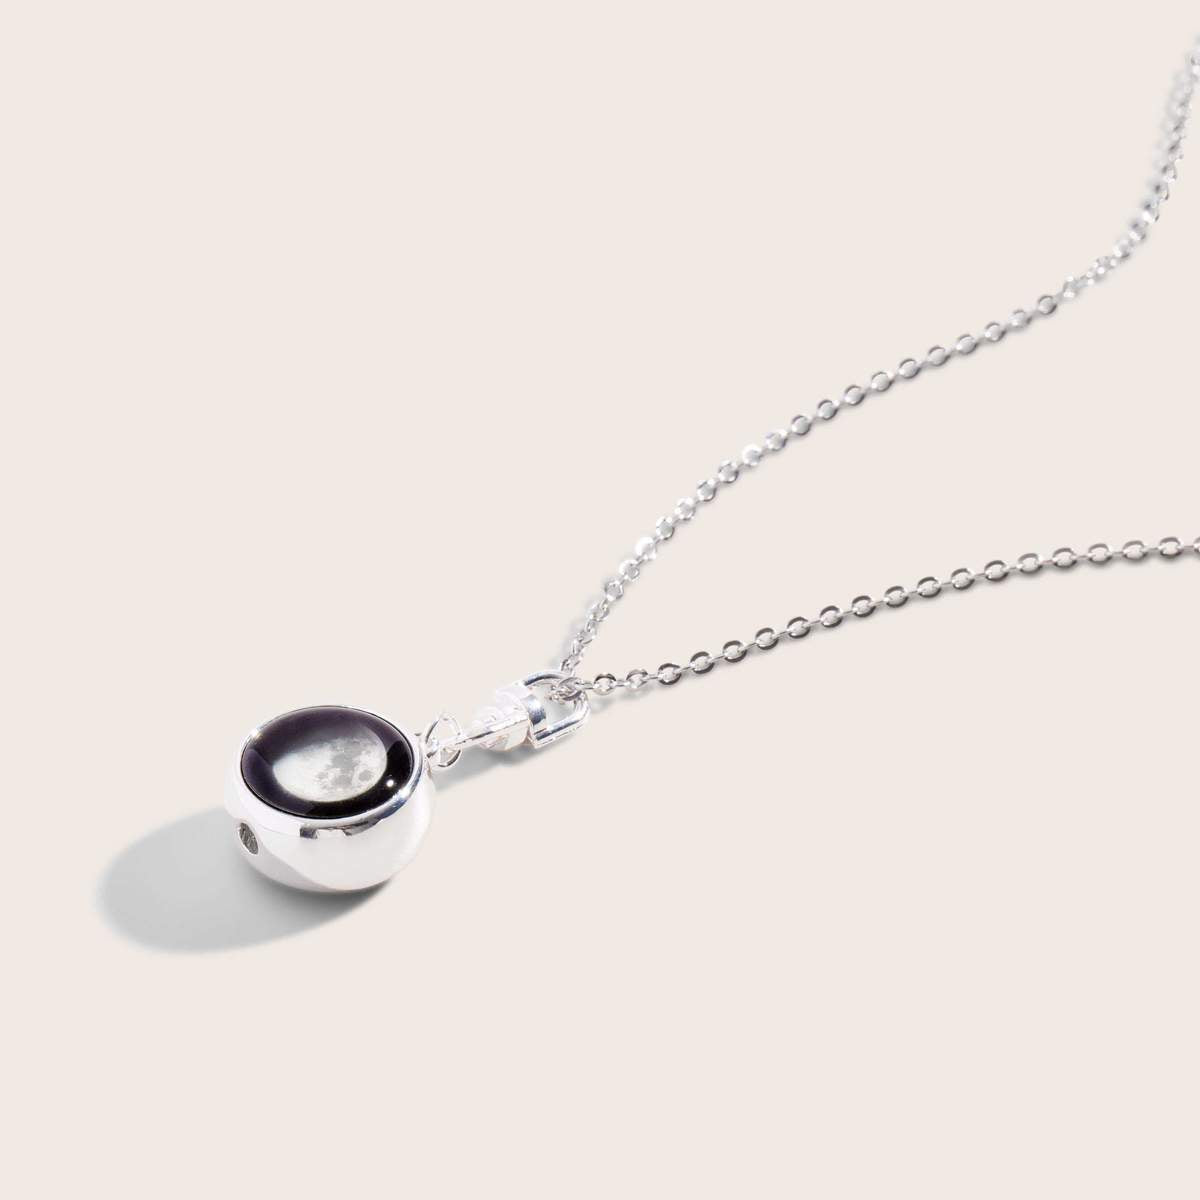 Moonspin Necklace in Silver